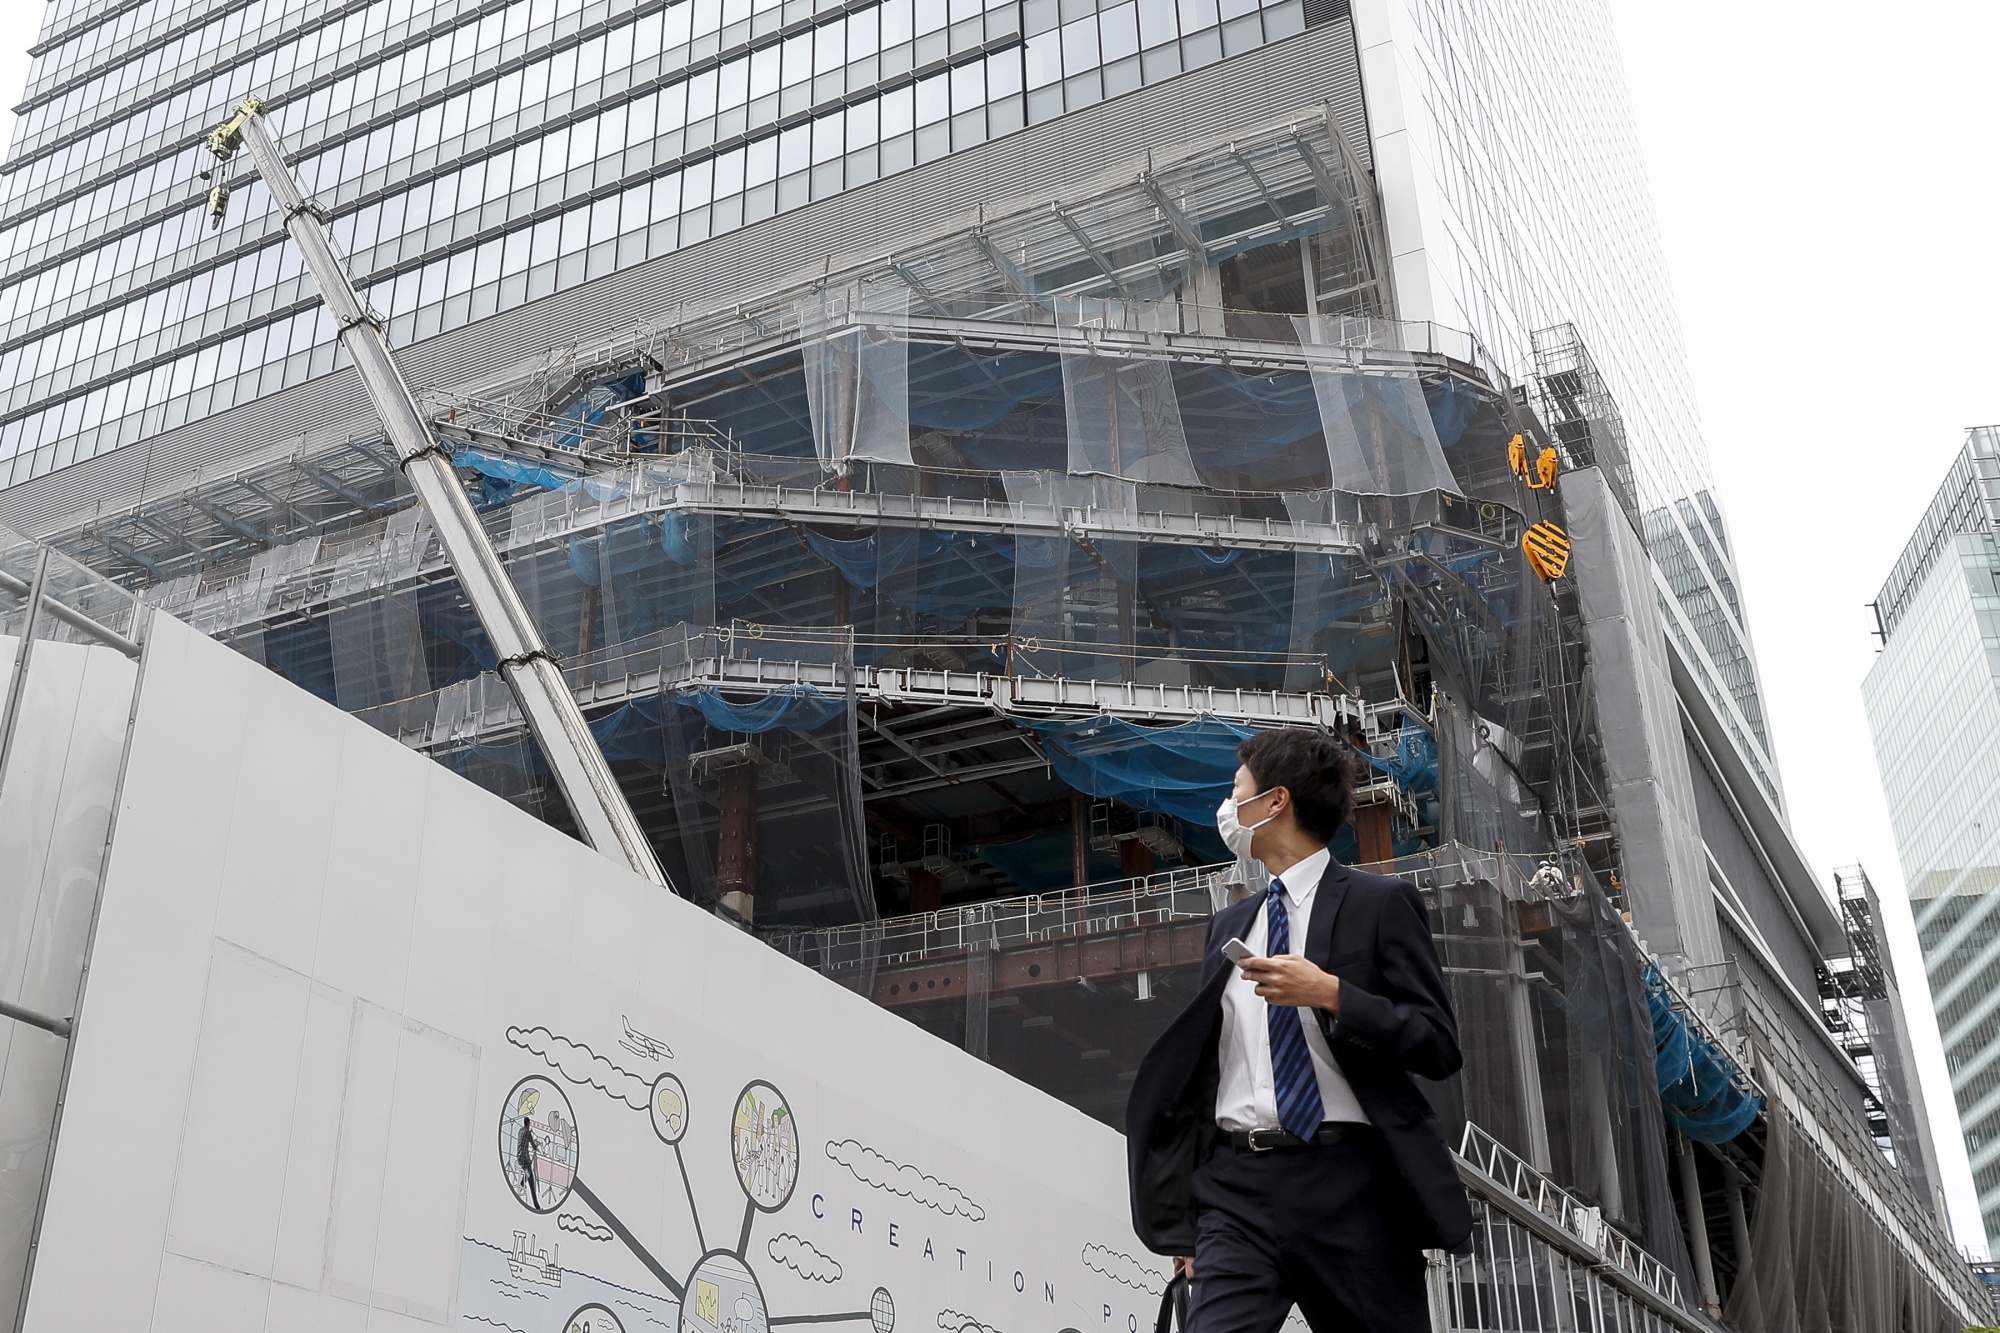 Building Construction At Hamamatsucho And Takeshiba Area As Japan's Unexpected GDP Growth Comes With Reasons for Caution